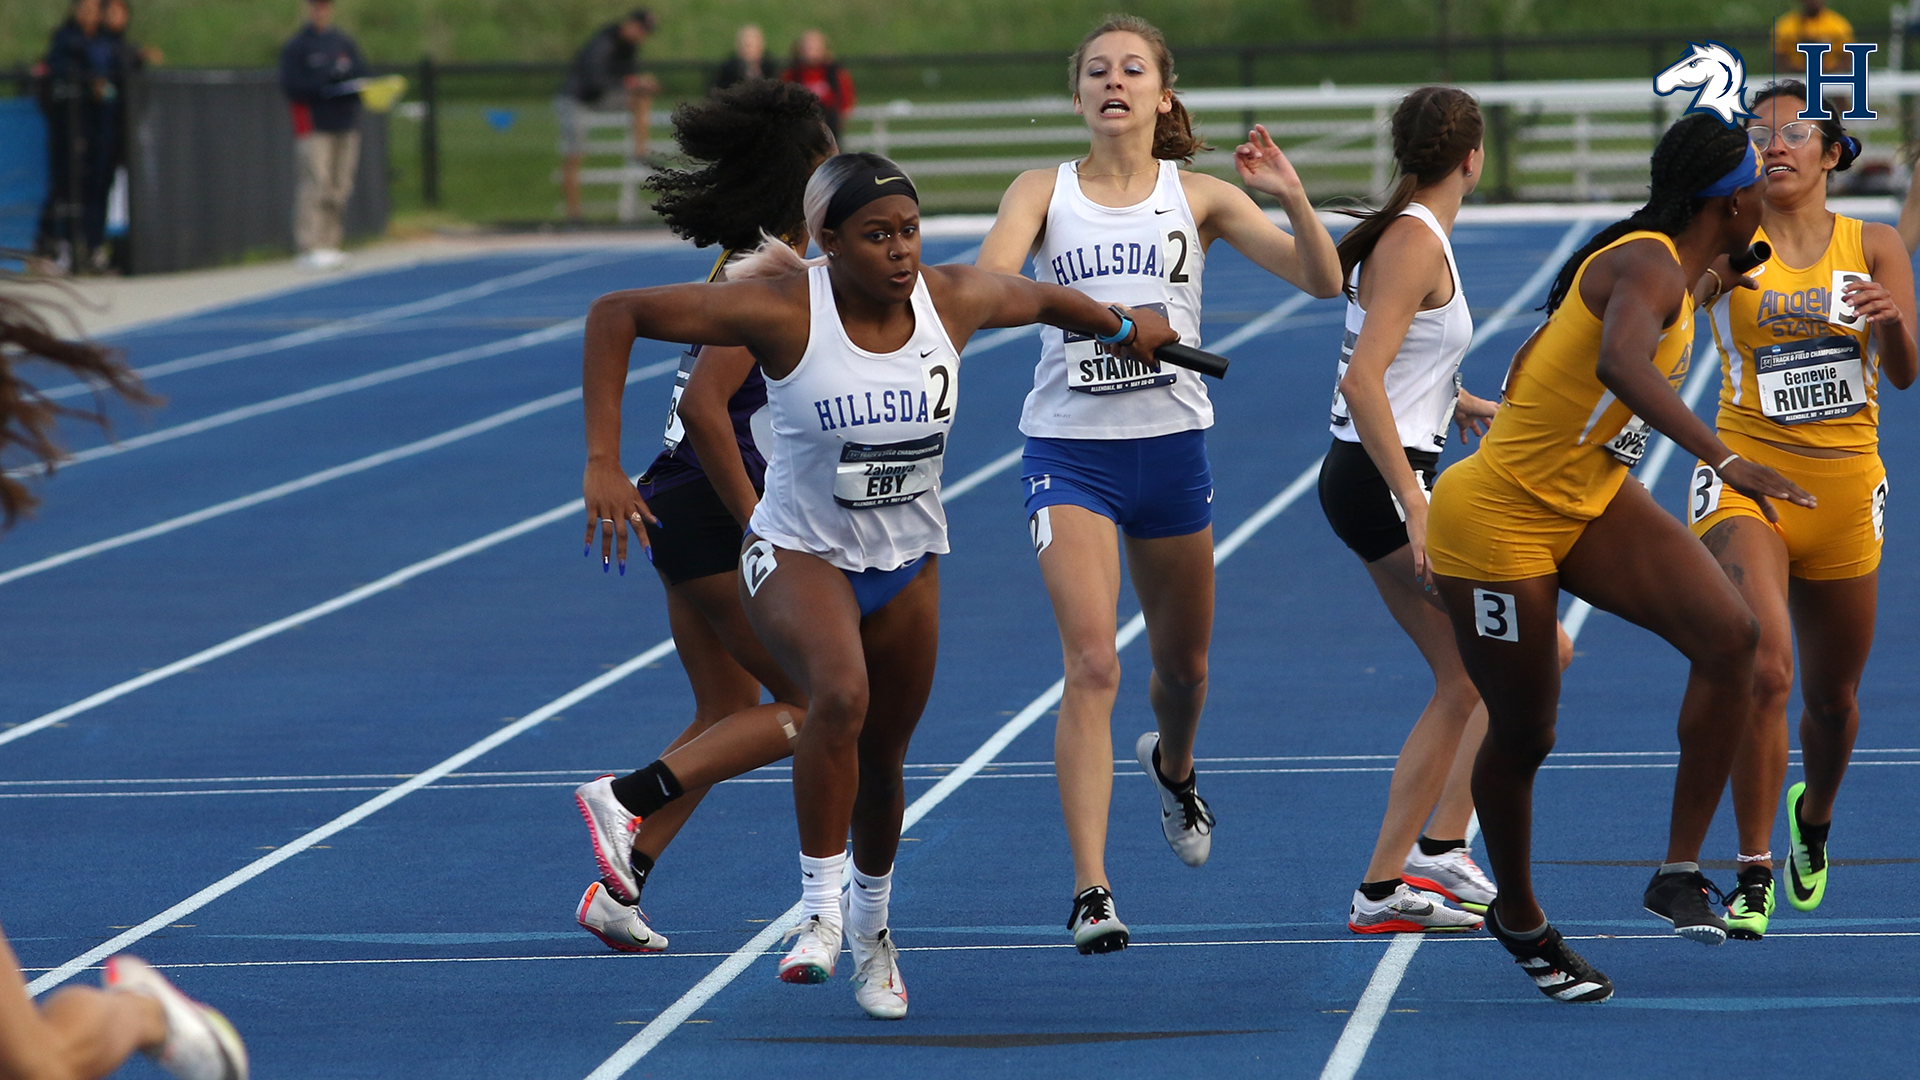 Charger 4x400m relay team qualifies for Saturday finals at NCAA DII Outdoor Championships